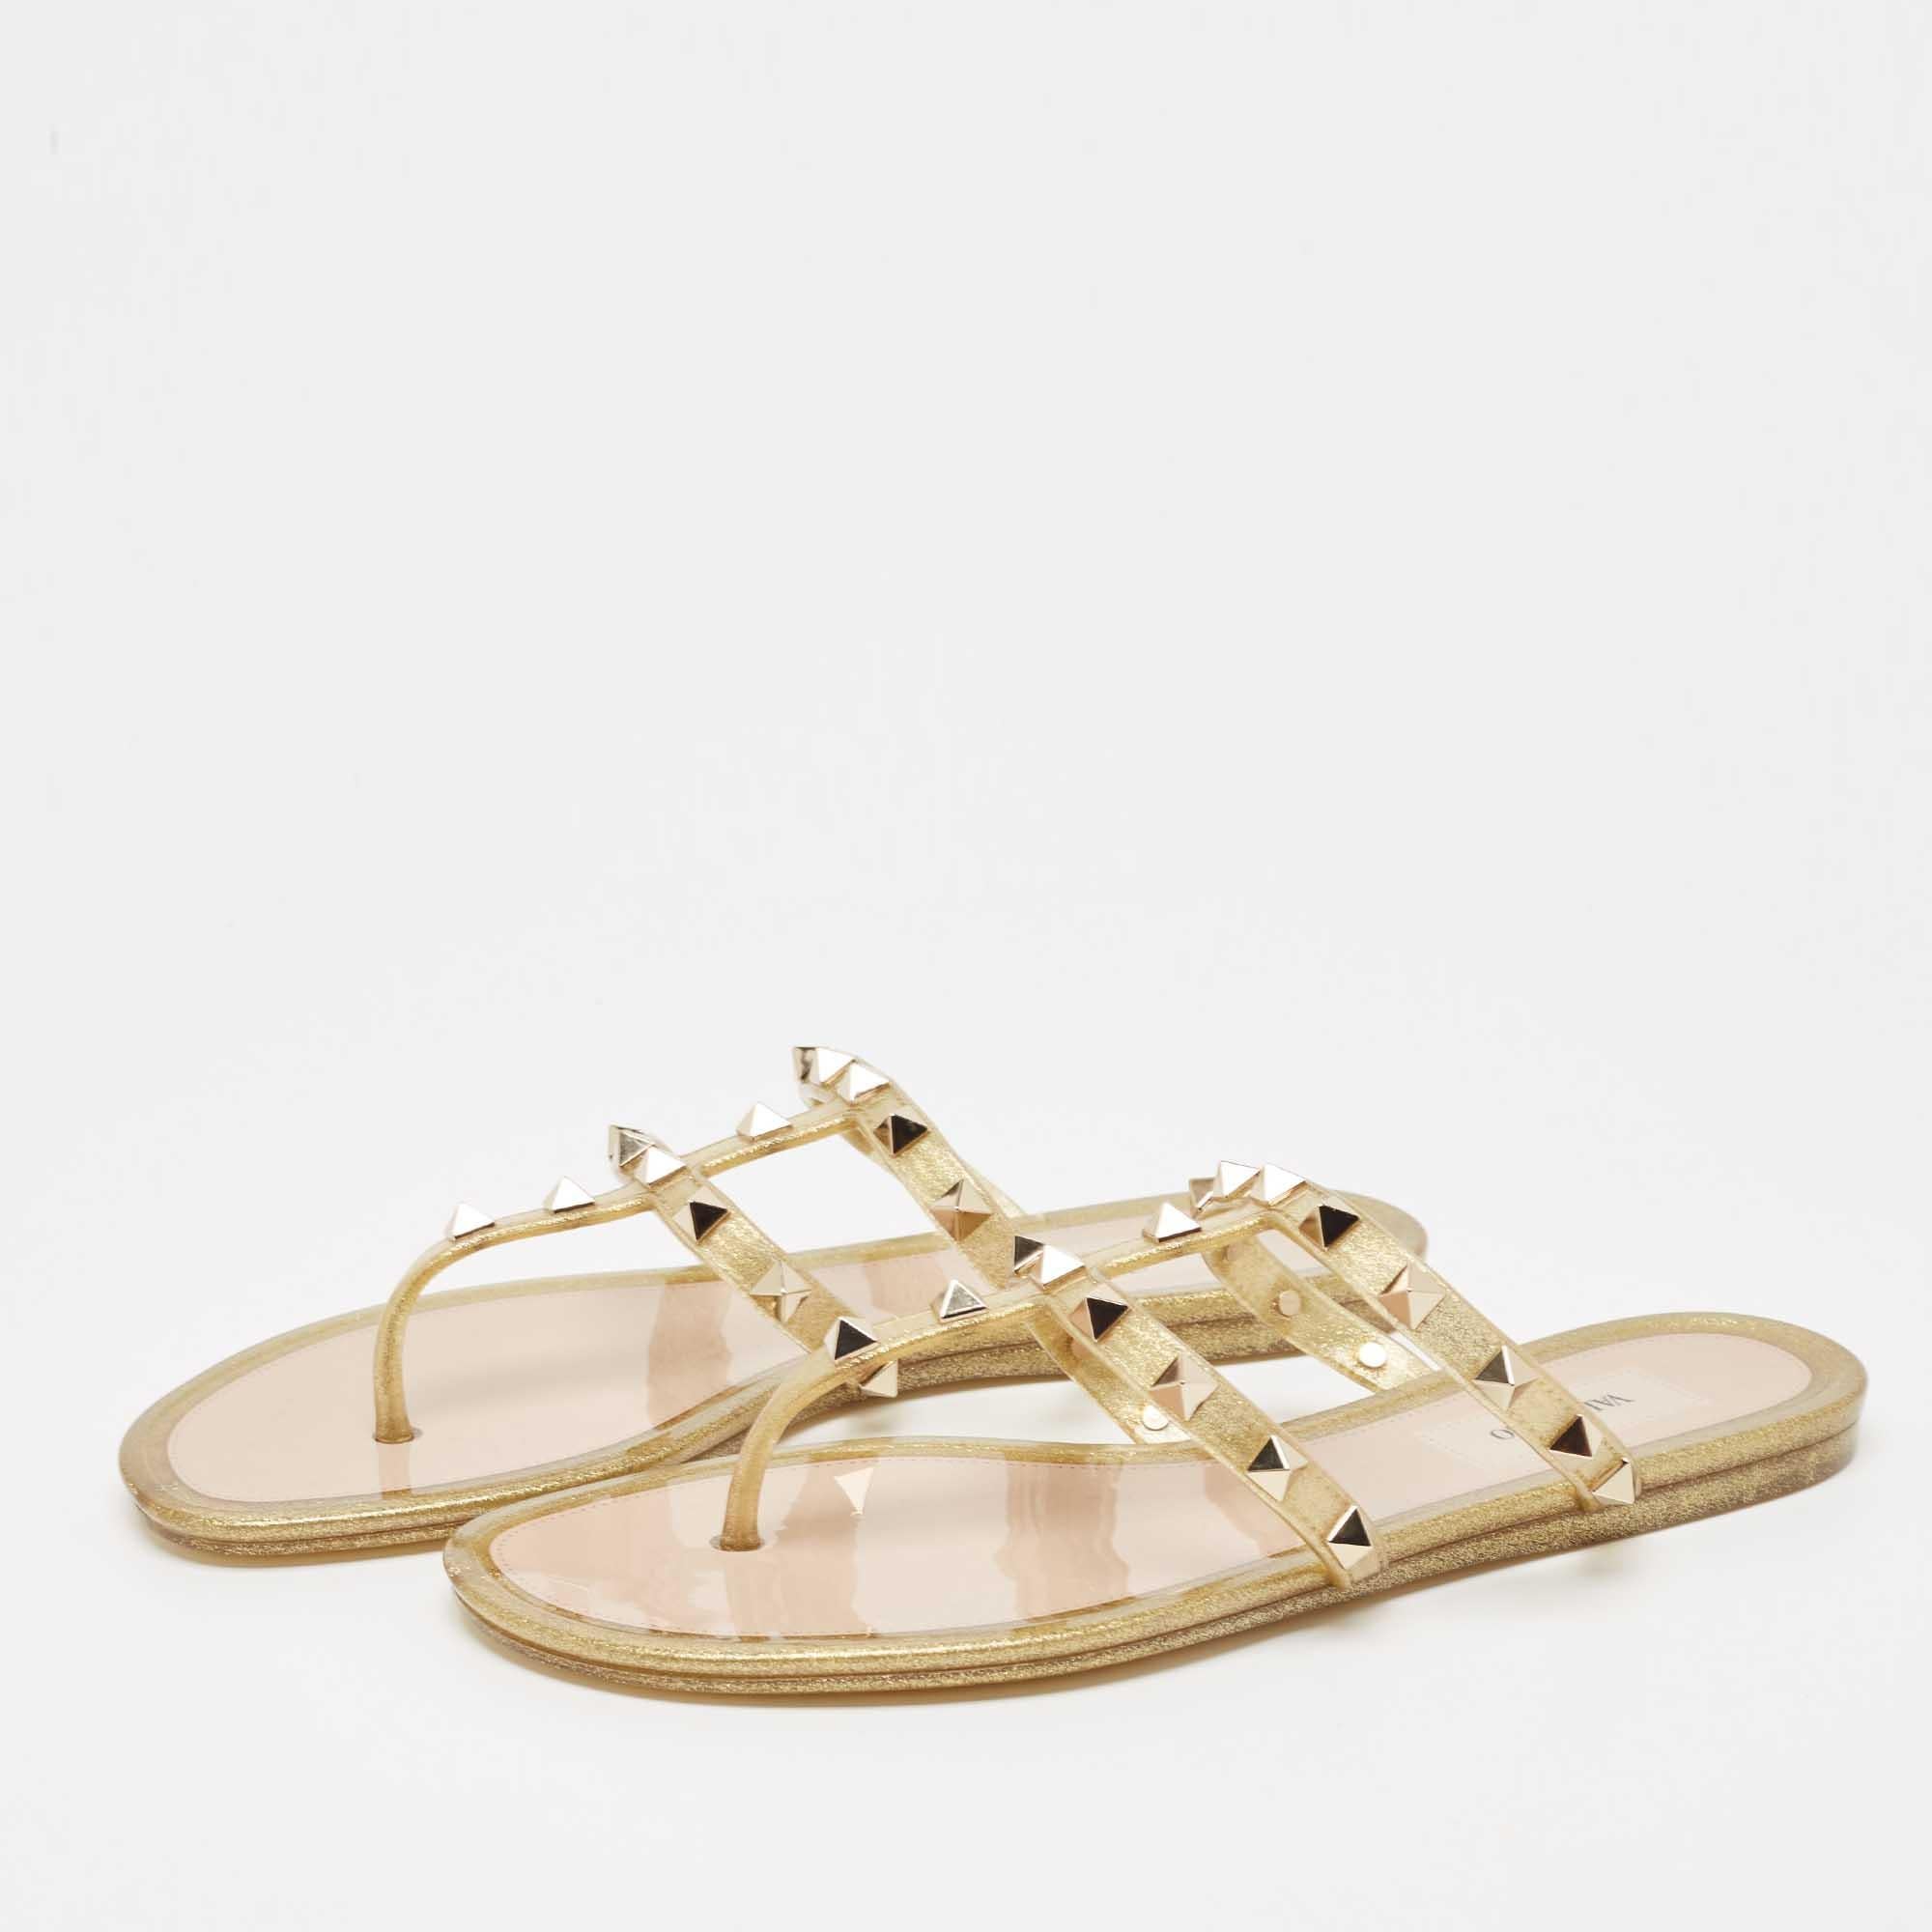 Frame your feet with these designer flat sandals. Created using the best materials, the flats are perfect with short, midi, and maxi hemlines.

